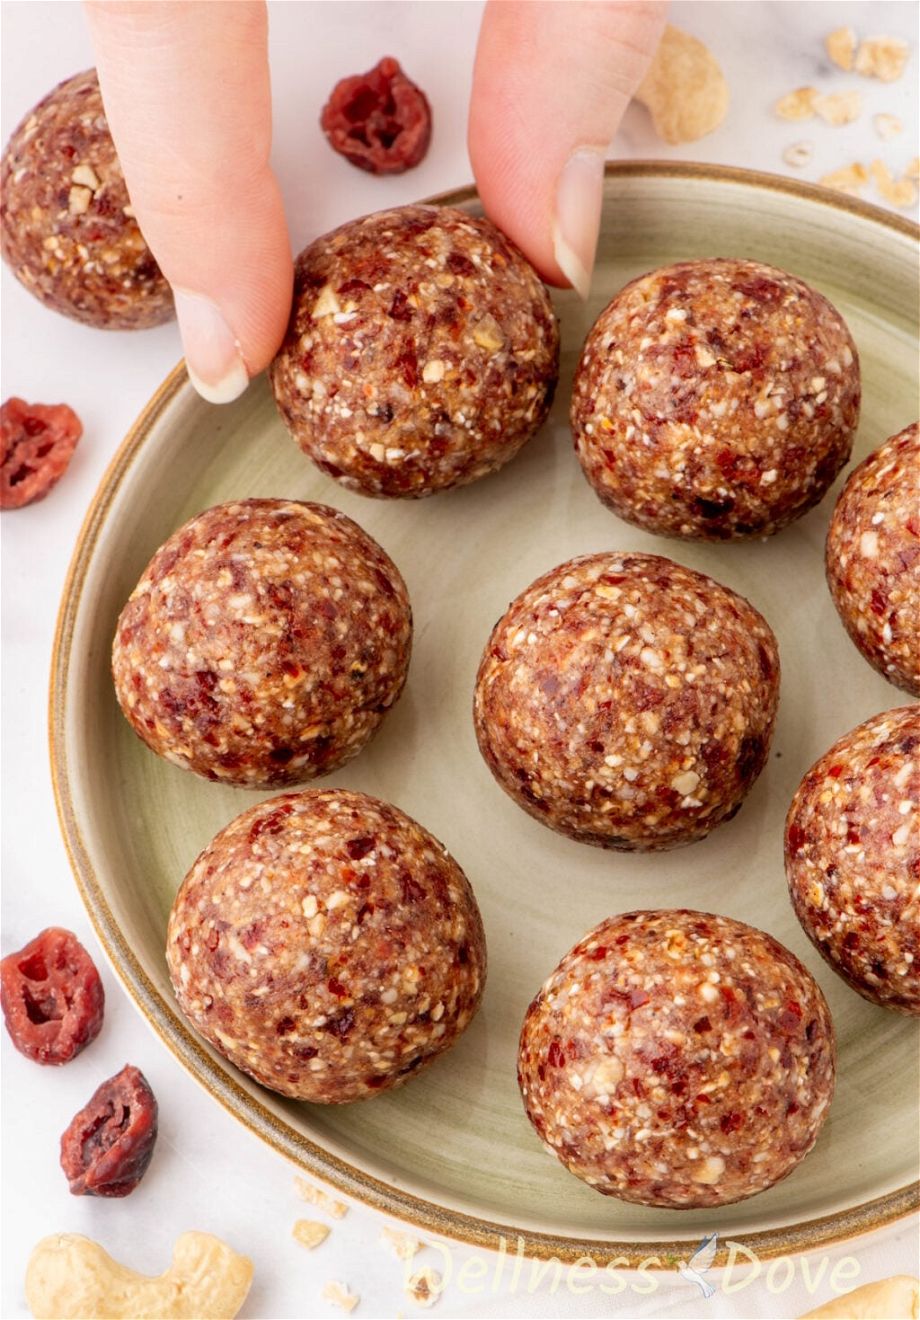 the The Cranberry Oatmeal Vegan Energy Bites in a small plate & a hand is taking one of the balls out